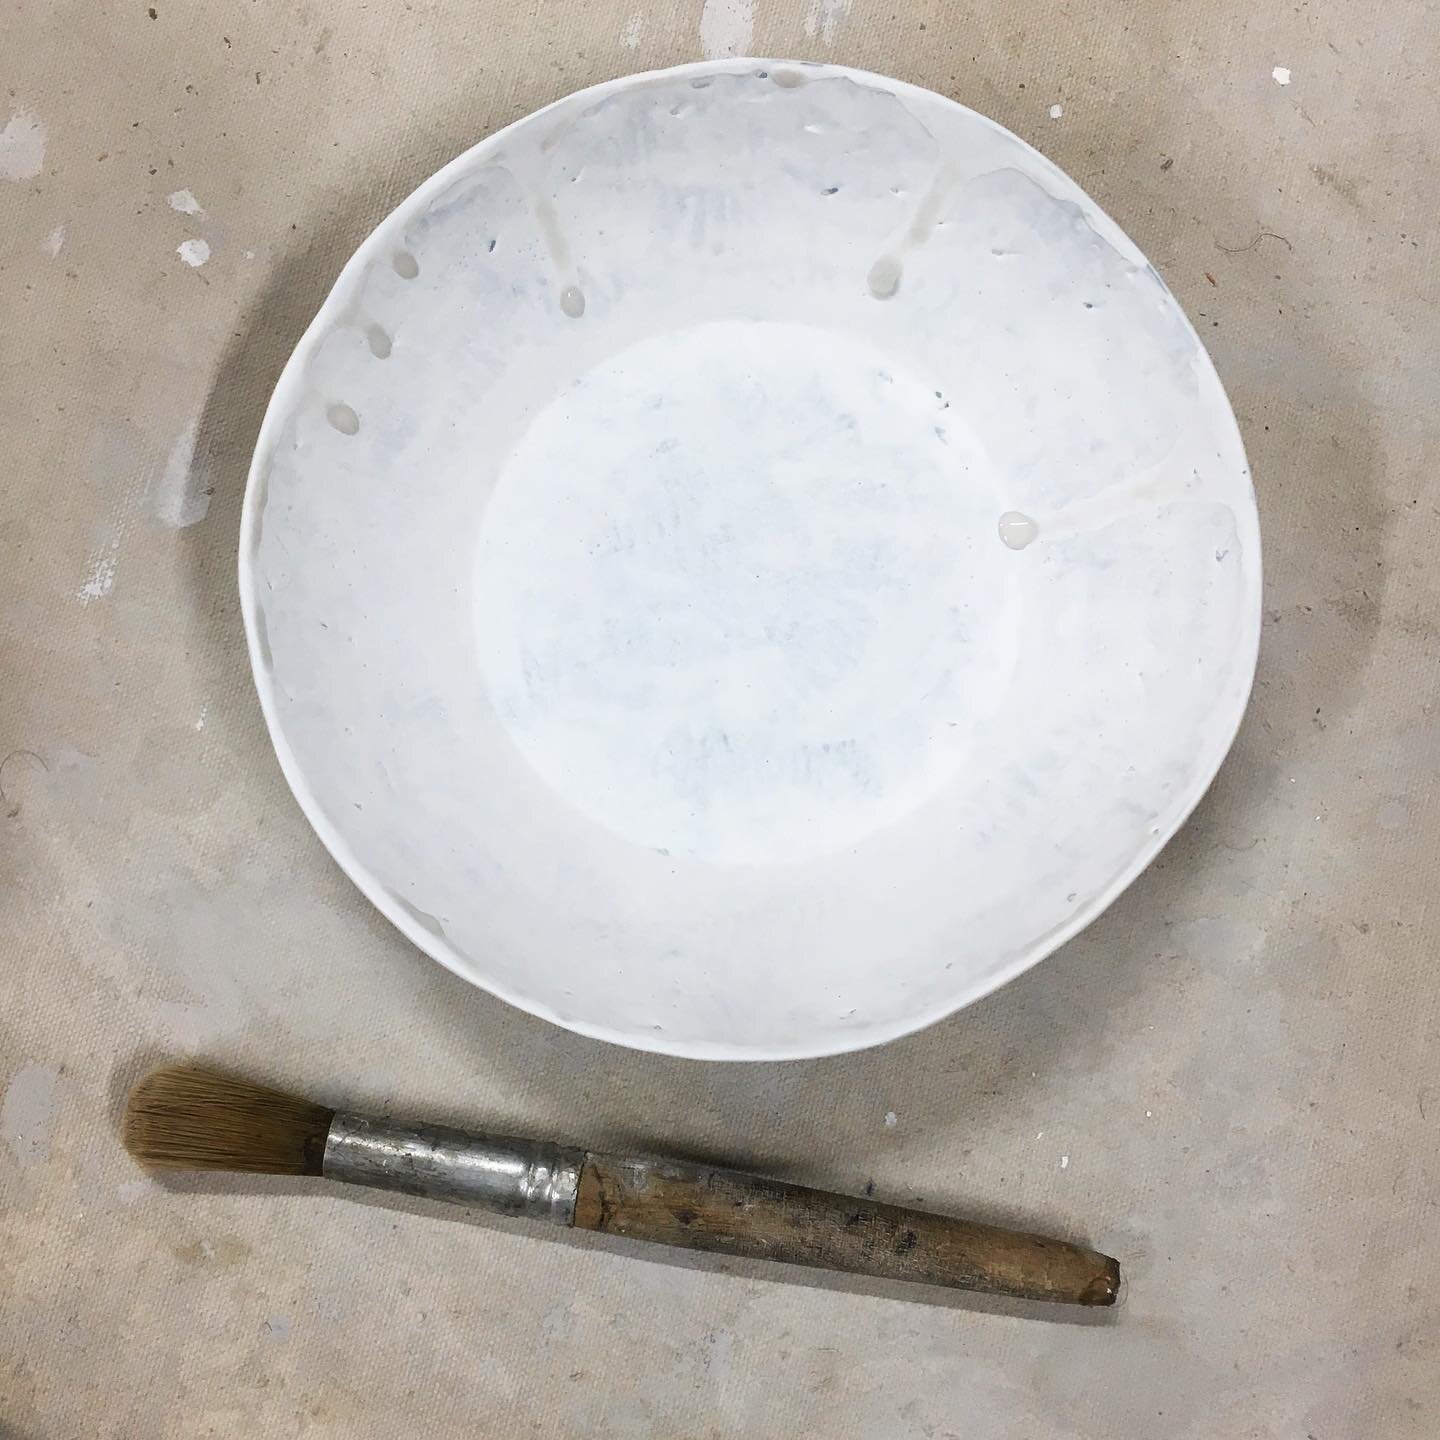 A new passion that&rsquo;s been consuming my interest lately.  I&rsquo;ve always been a bit obsessed with bowls and all things pottery.  been wanting to take ceramic classes for years and finally did! just finished my first workshop series and here&r